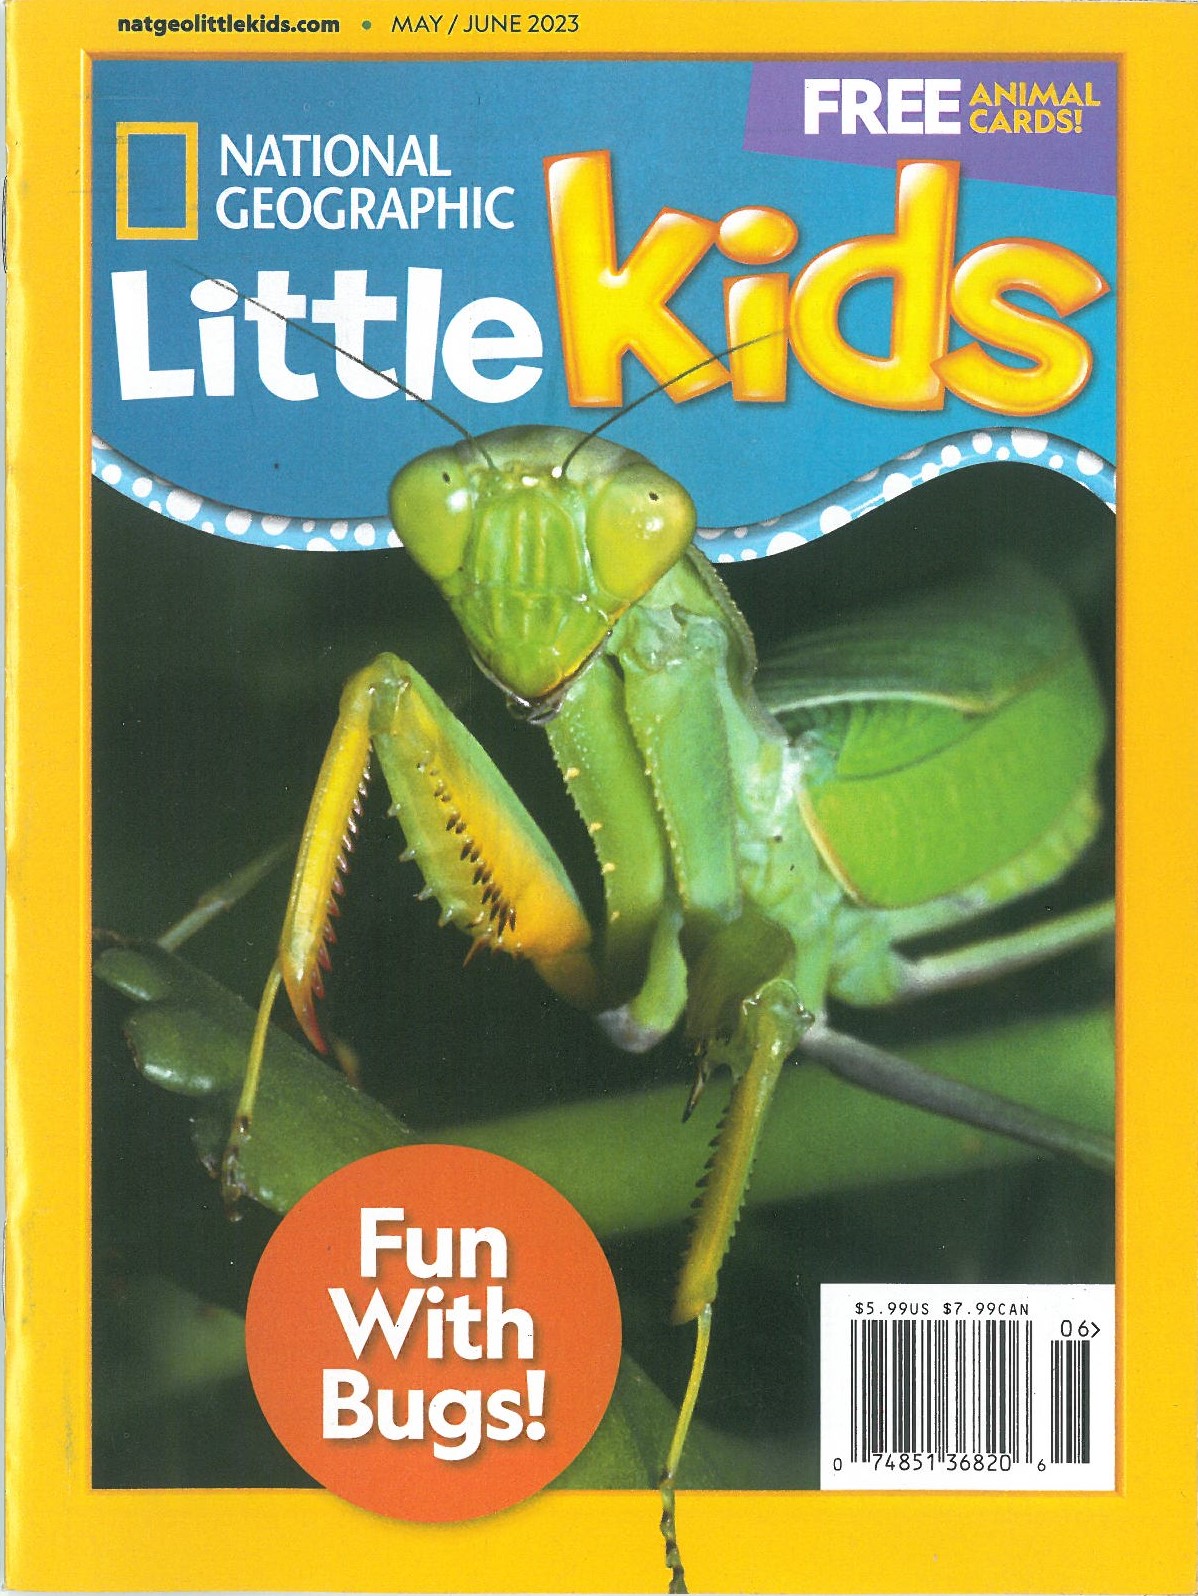 NATIONAL GEOGRAPHIC LITTLE KIDS ISSUE OF MAY/JUNE 2023